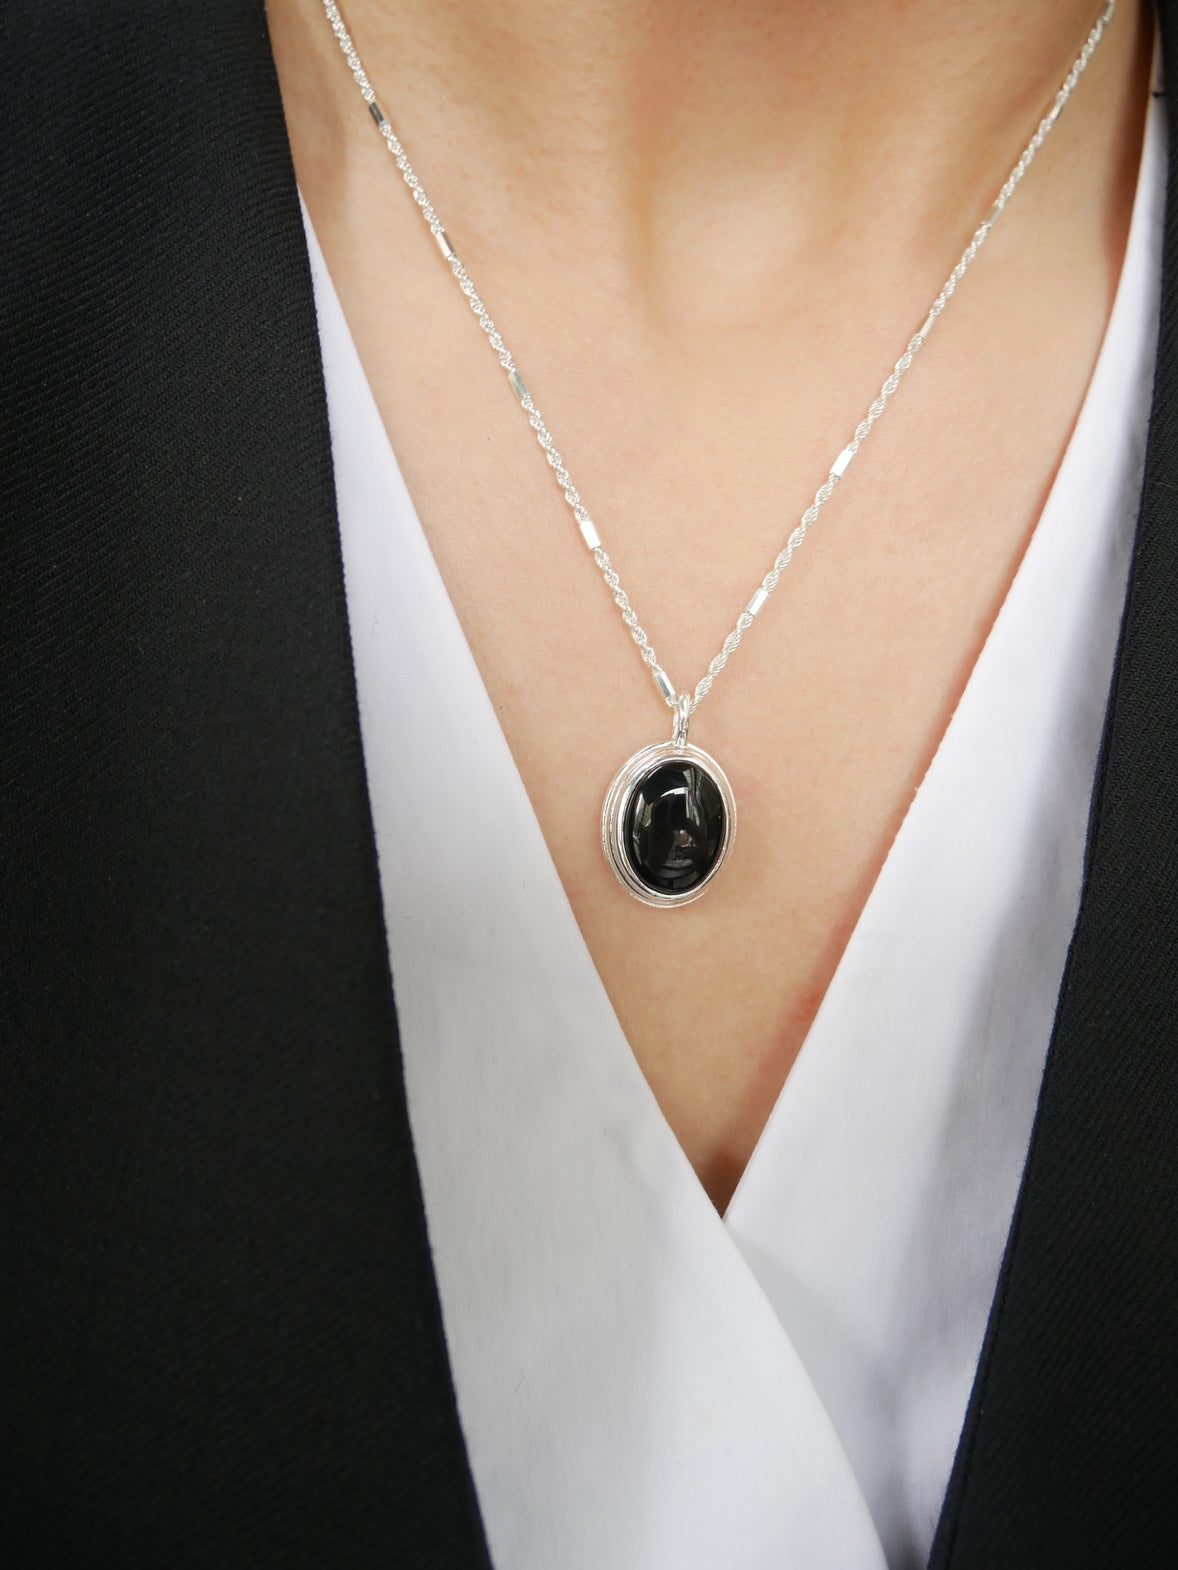 925 Silver Simple Japanese And Korean Black Agate Geometric Oval Pendant Trendy Twist Necklace